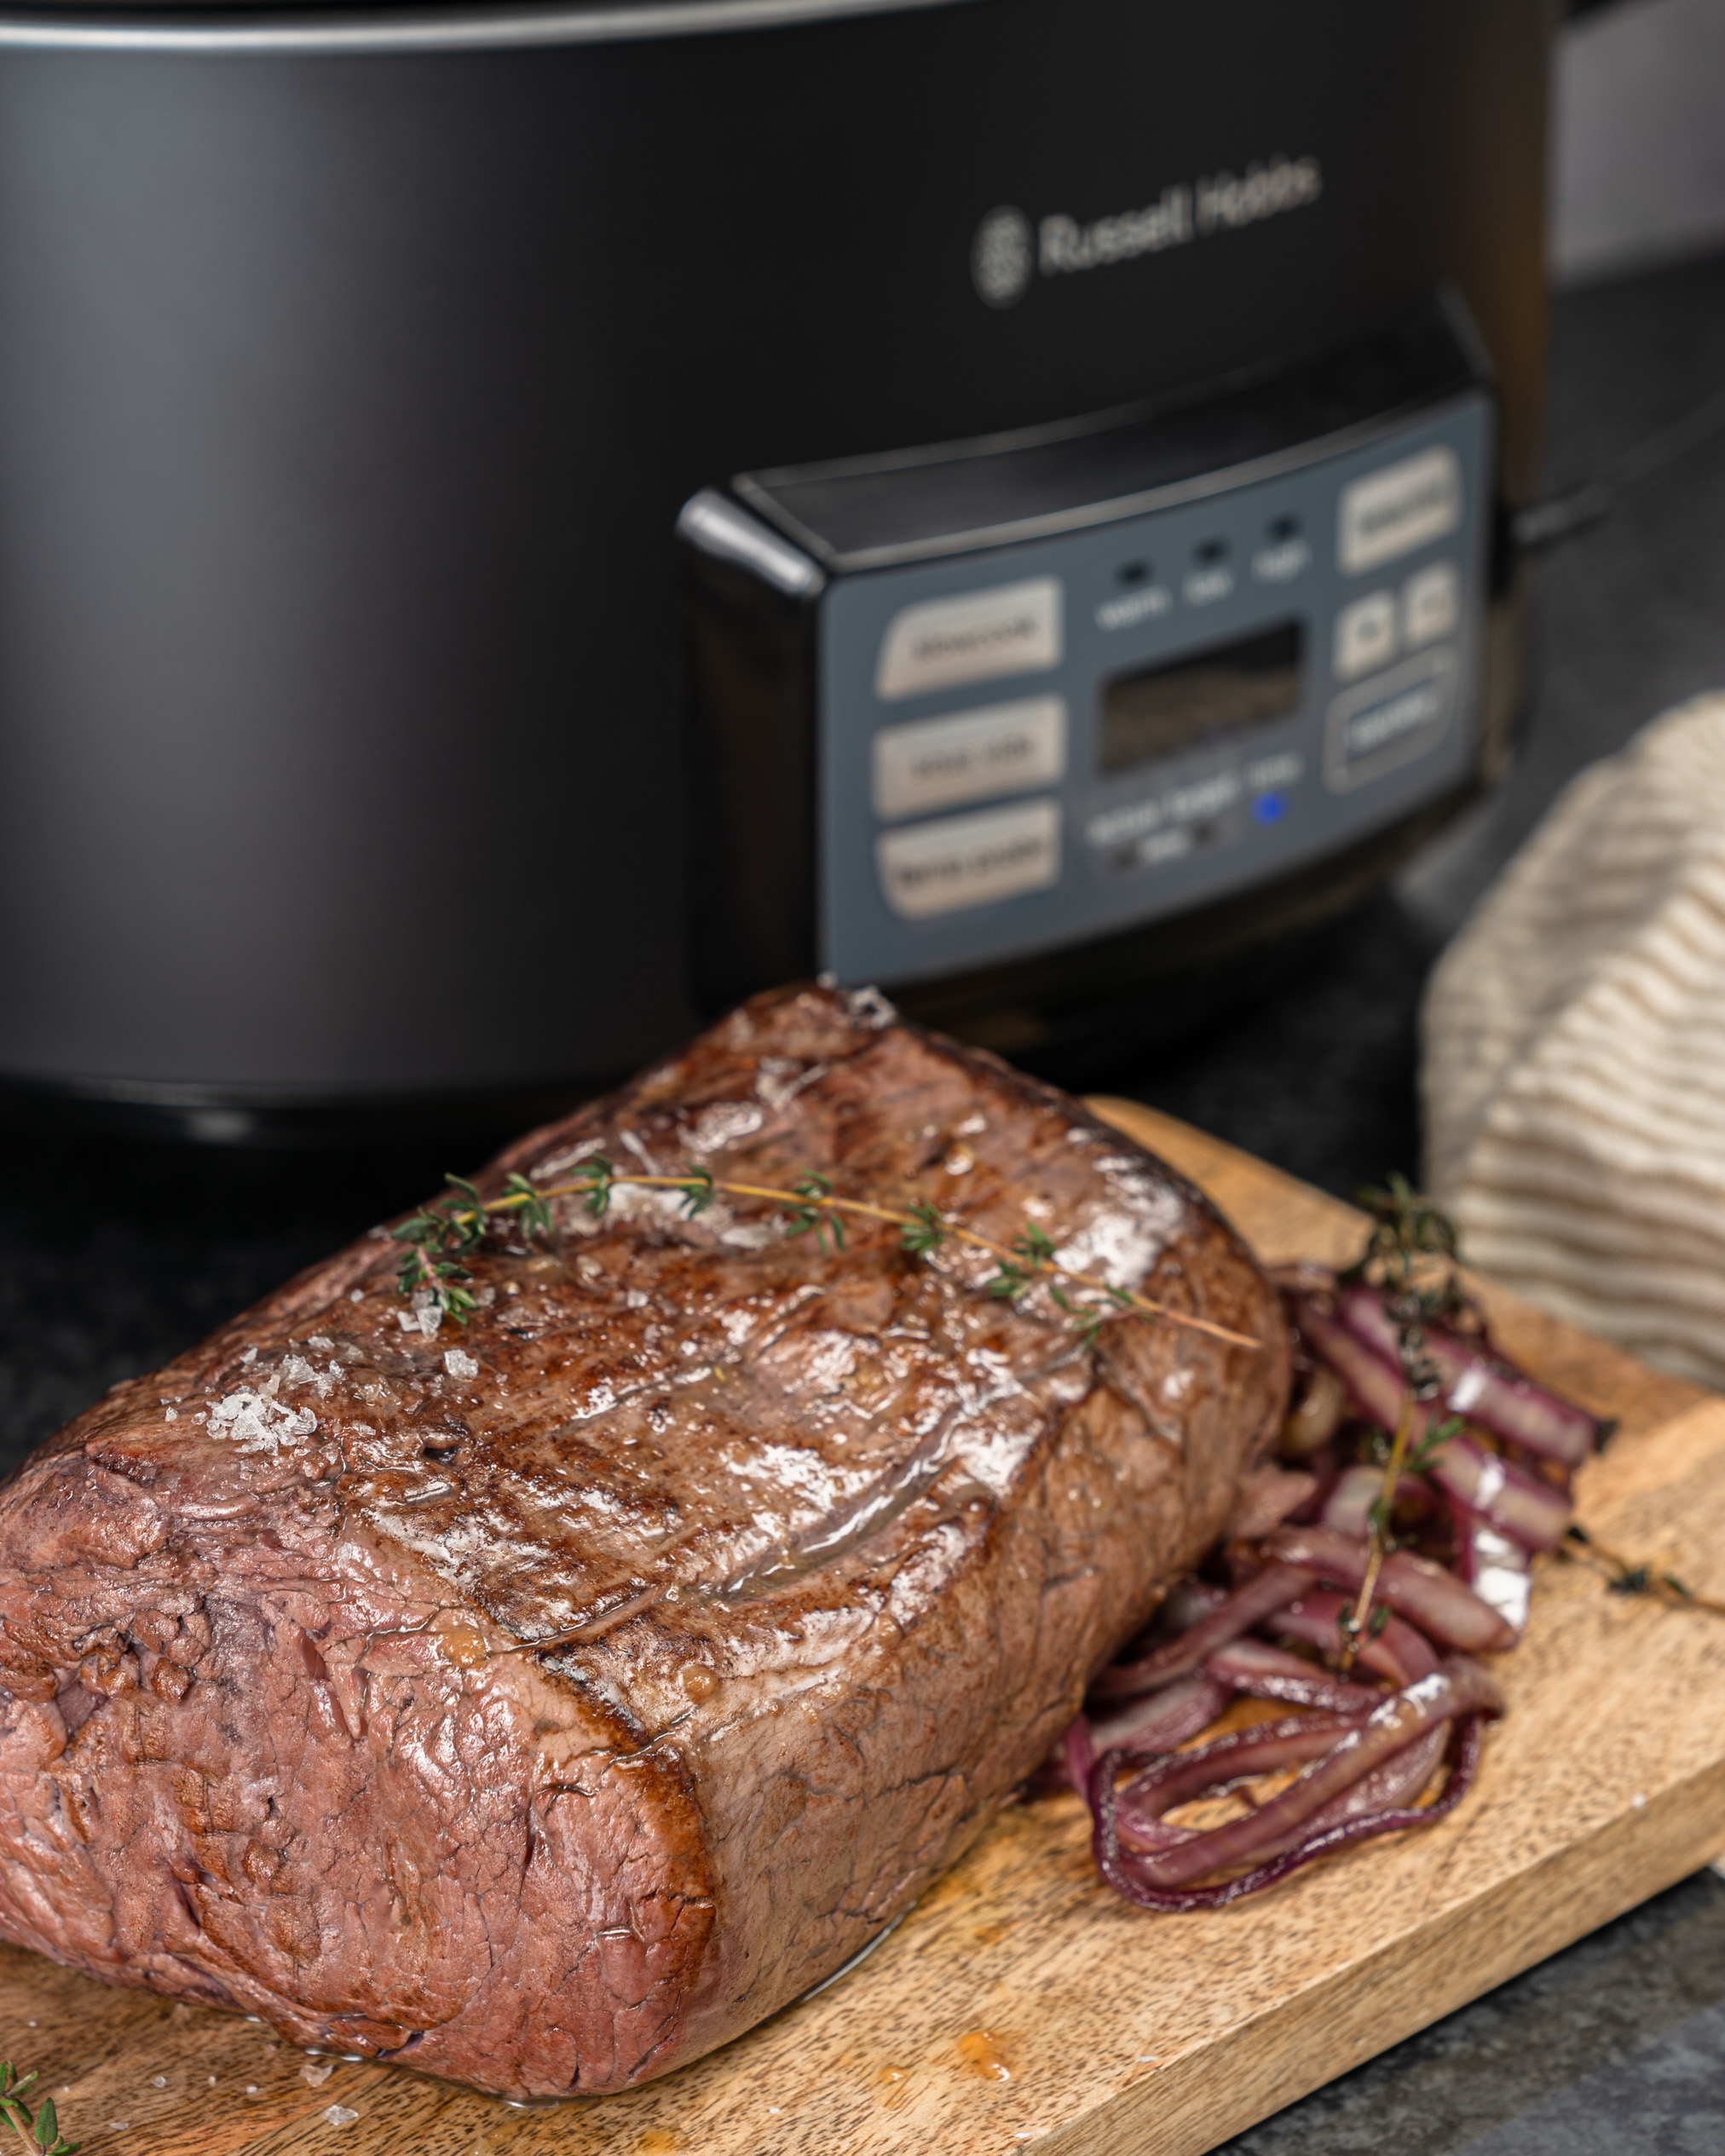 Russell Hobbs sous vide slow cooker review